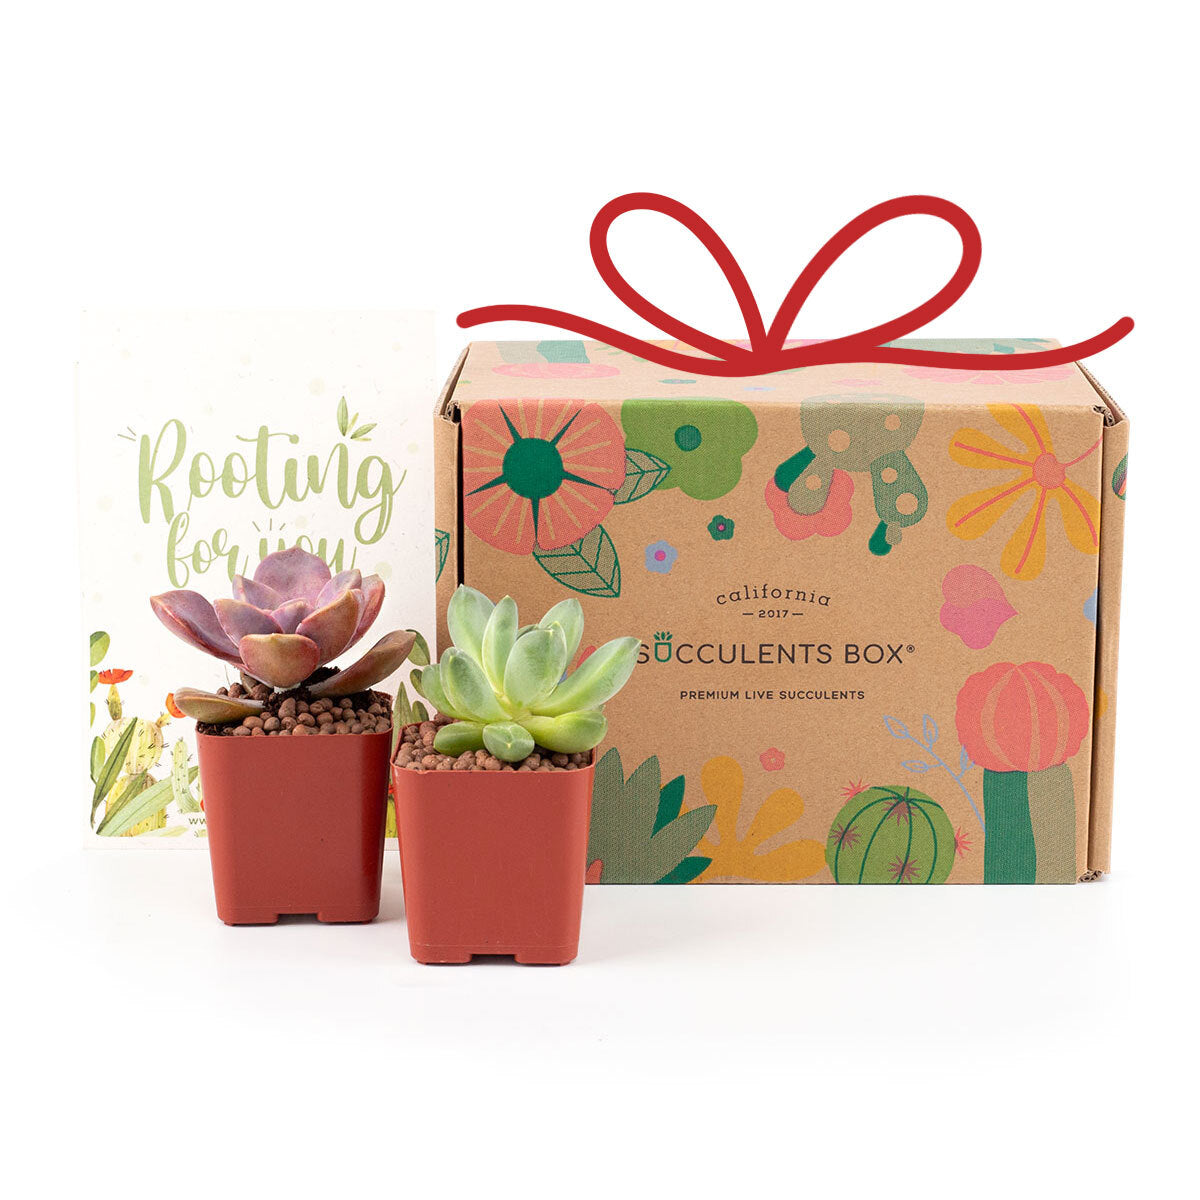 Monthly Subscription Box as a gift, Live succulent gift ideas